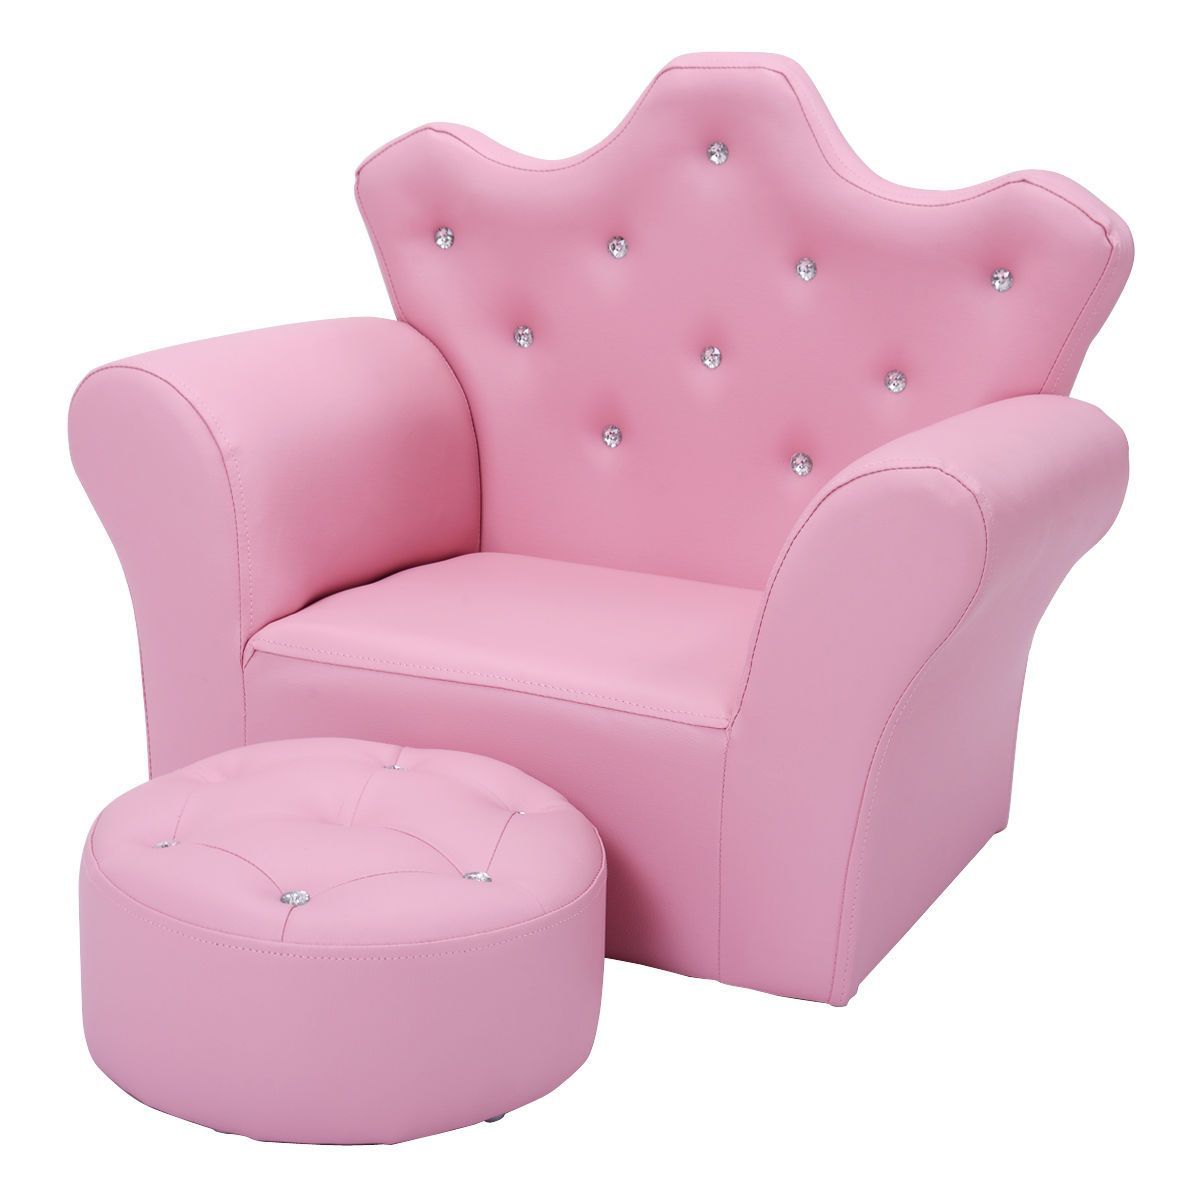 Toddler Sofa Chairs With Regard To 2018 Pink Kids Sofa Armrest Chair Couch Children Toddler Birthday Gift W (View 2 of 20)